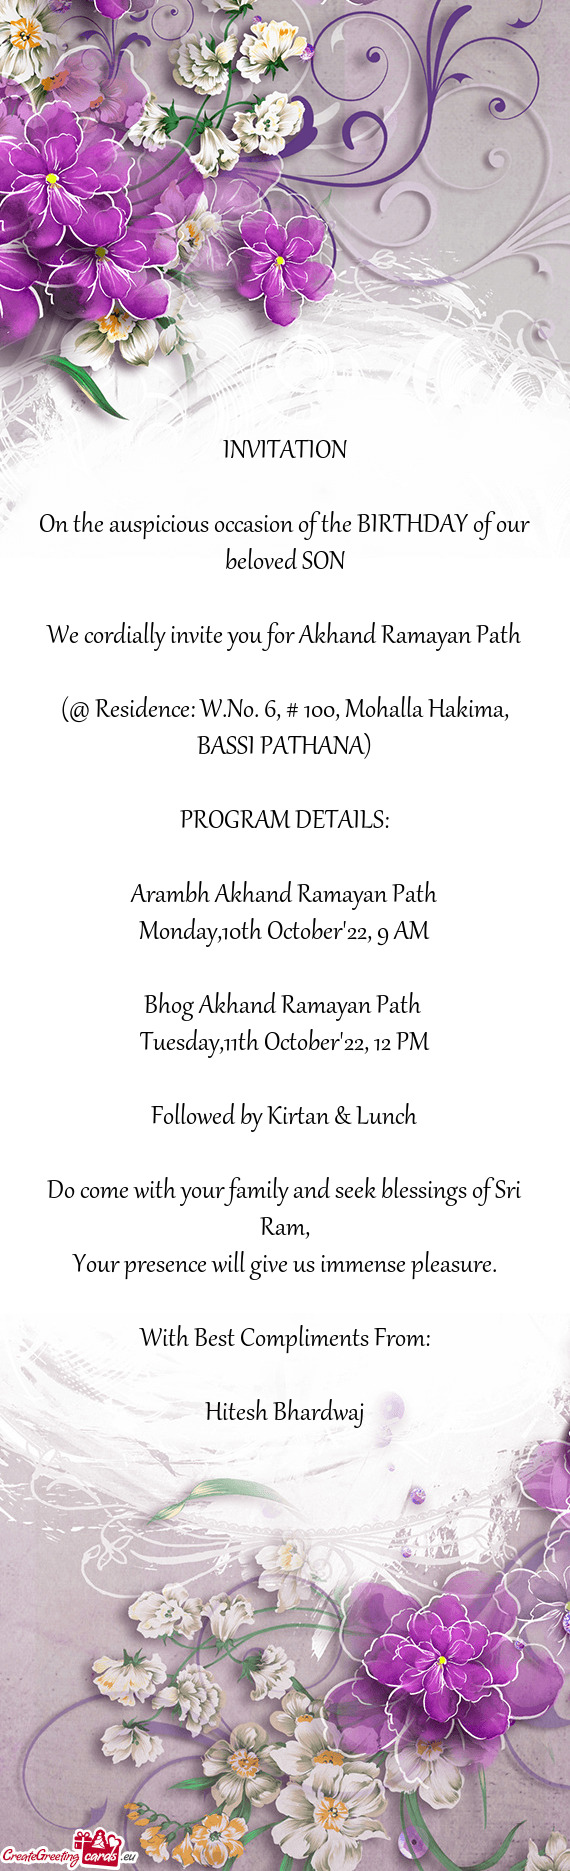 We cordially invite you for Akhand Ramayan Path